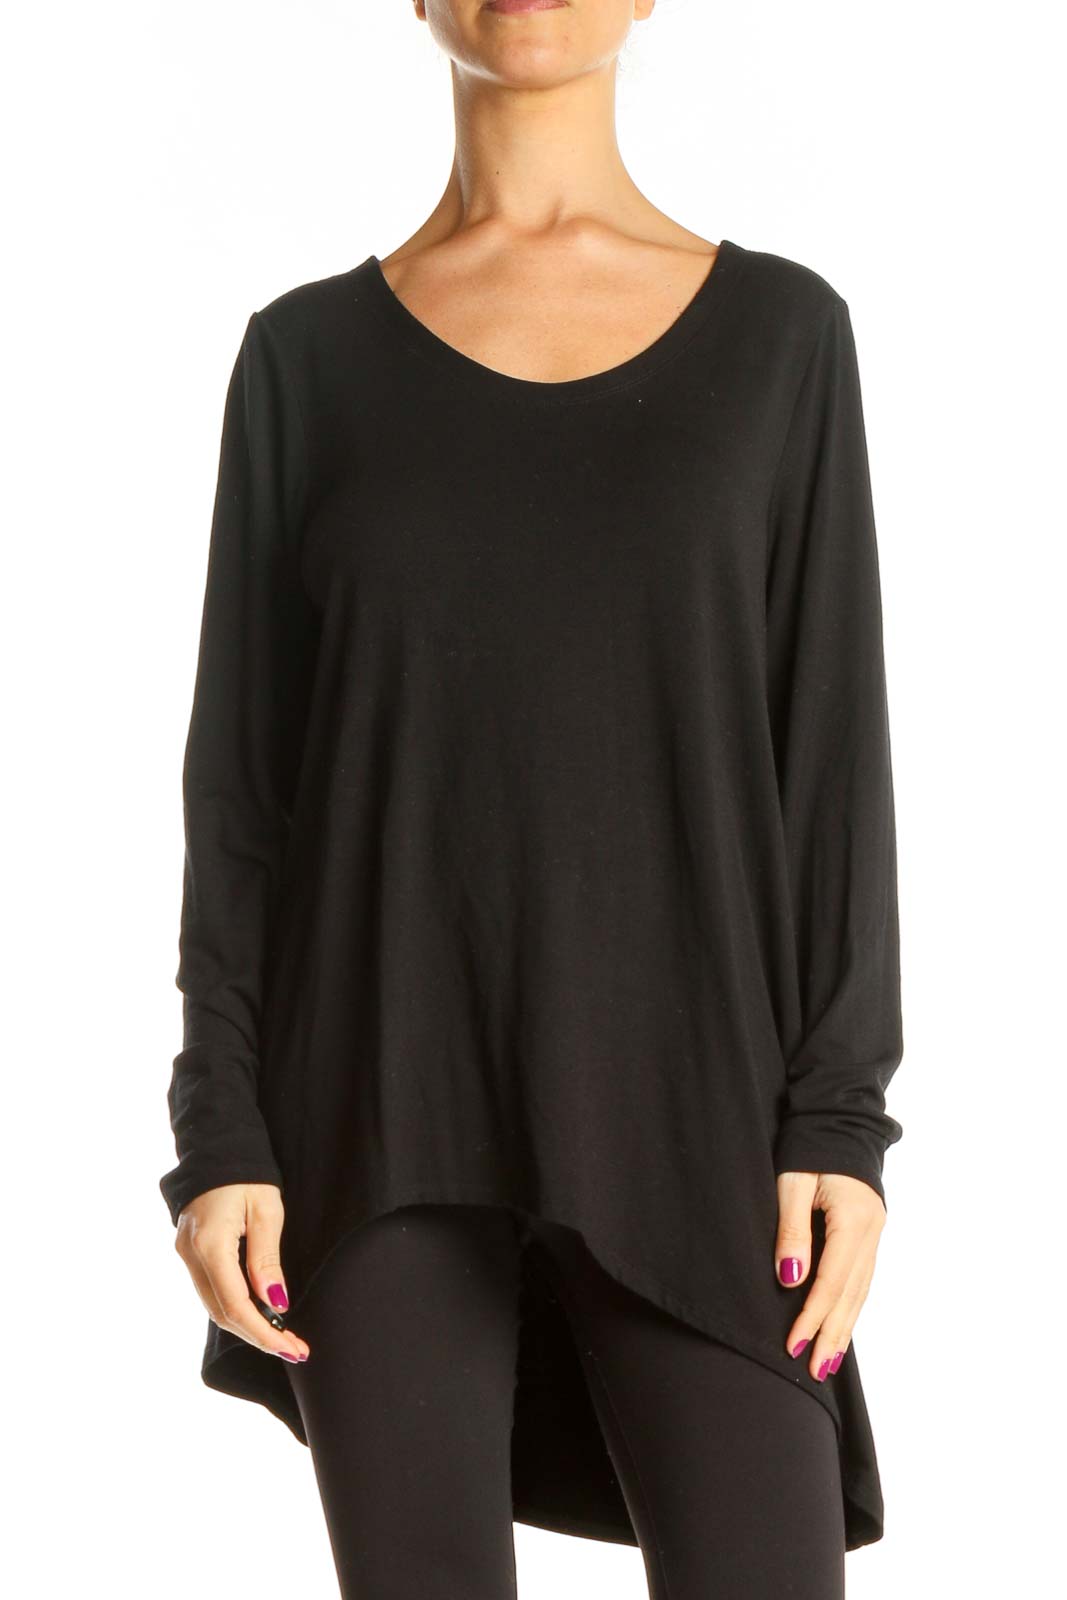 Black All Day Wear Top Front